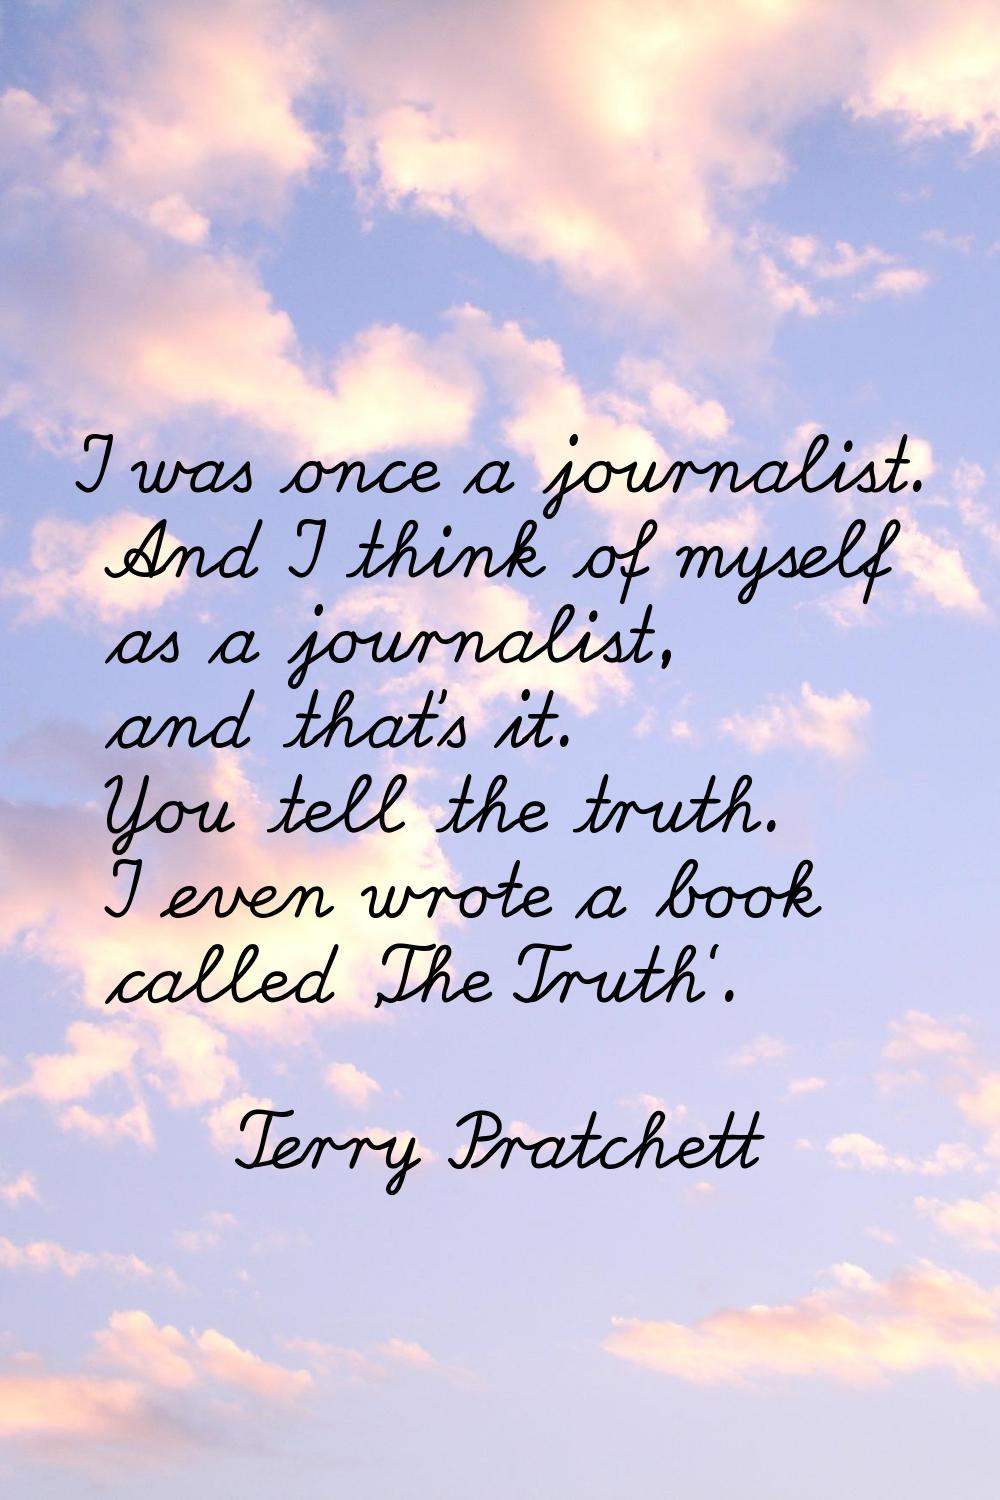 I was once a journalist. And I think of myself as a journalist, and that's it. You tell the truth. 